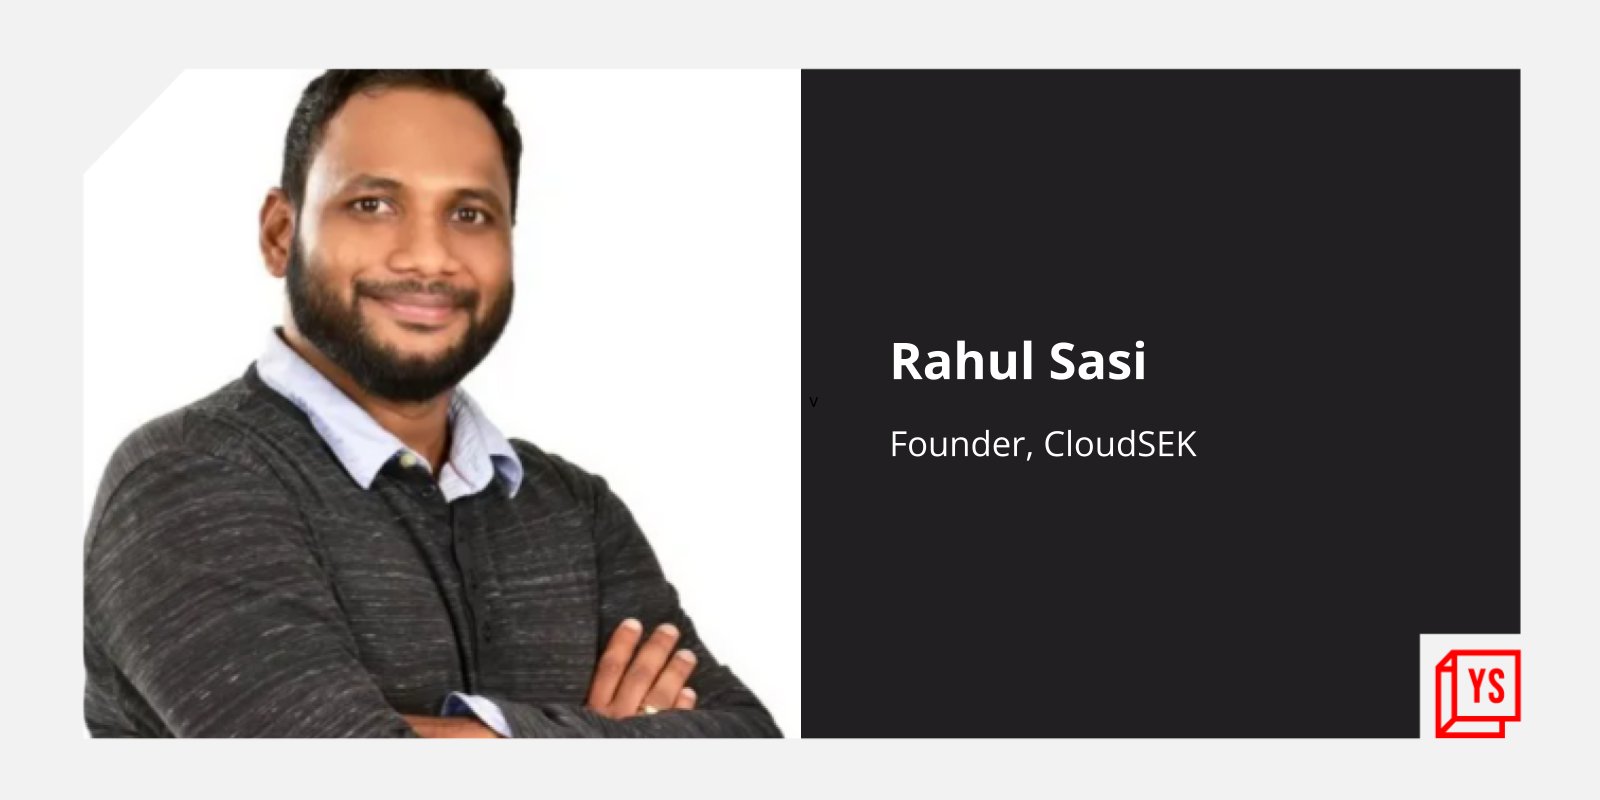 Entrepreneur Rahul Sasi on shielding big tech startups, Fortune 500 companies from internet's underbelly